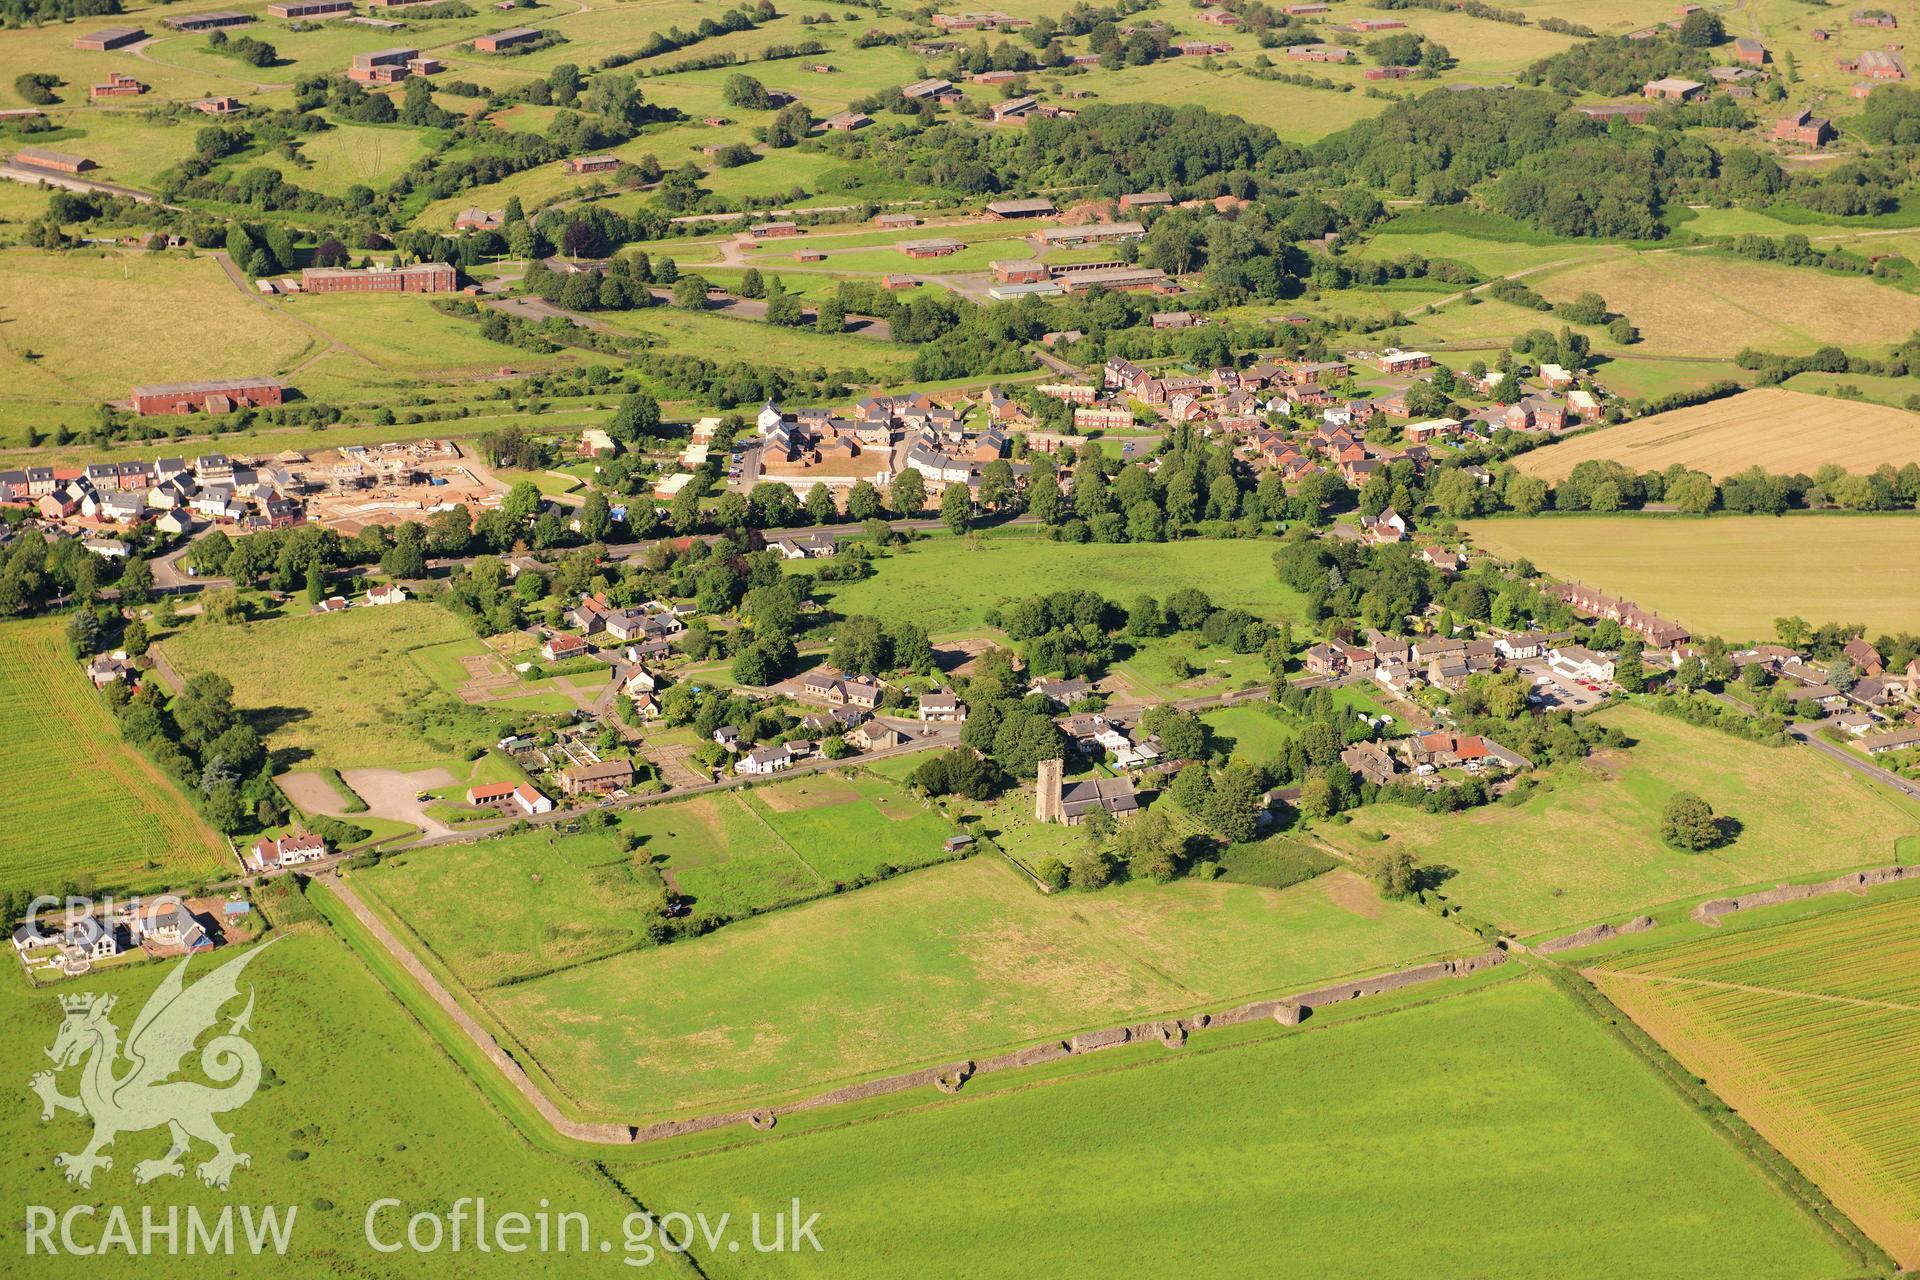 RCAHMW colour oblique photograph of Caerwent Roman town, landscape view from southwest. Taken by Toby Driver on 24/07/2012.